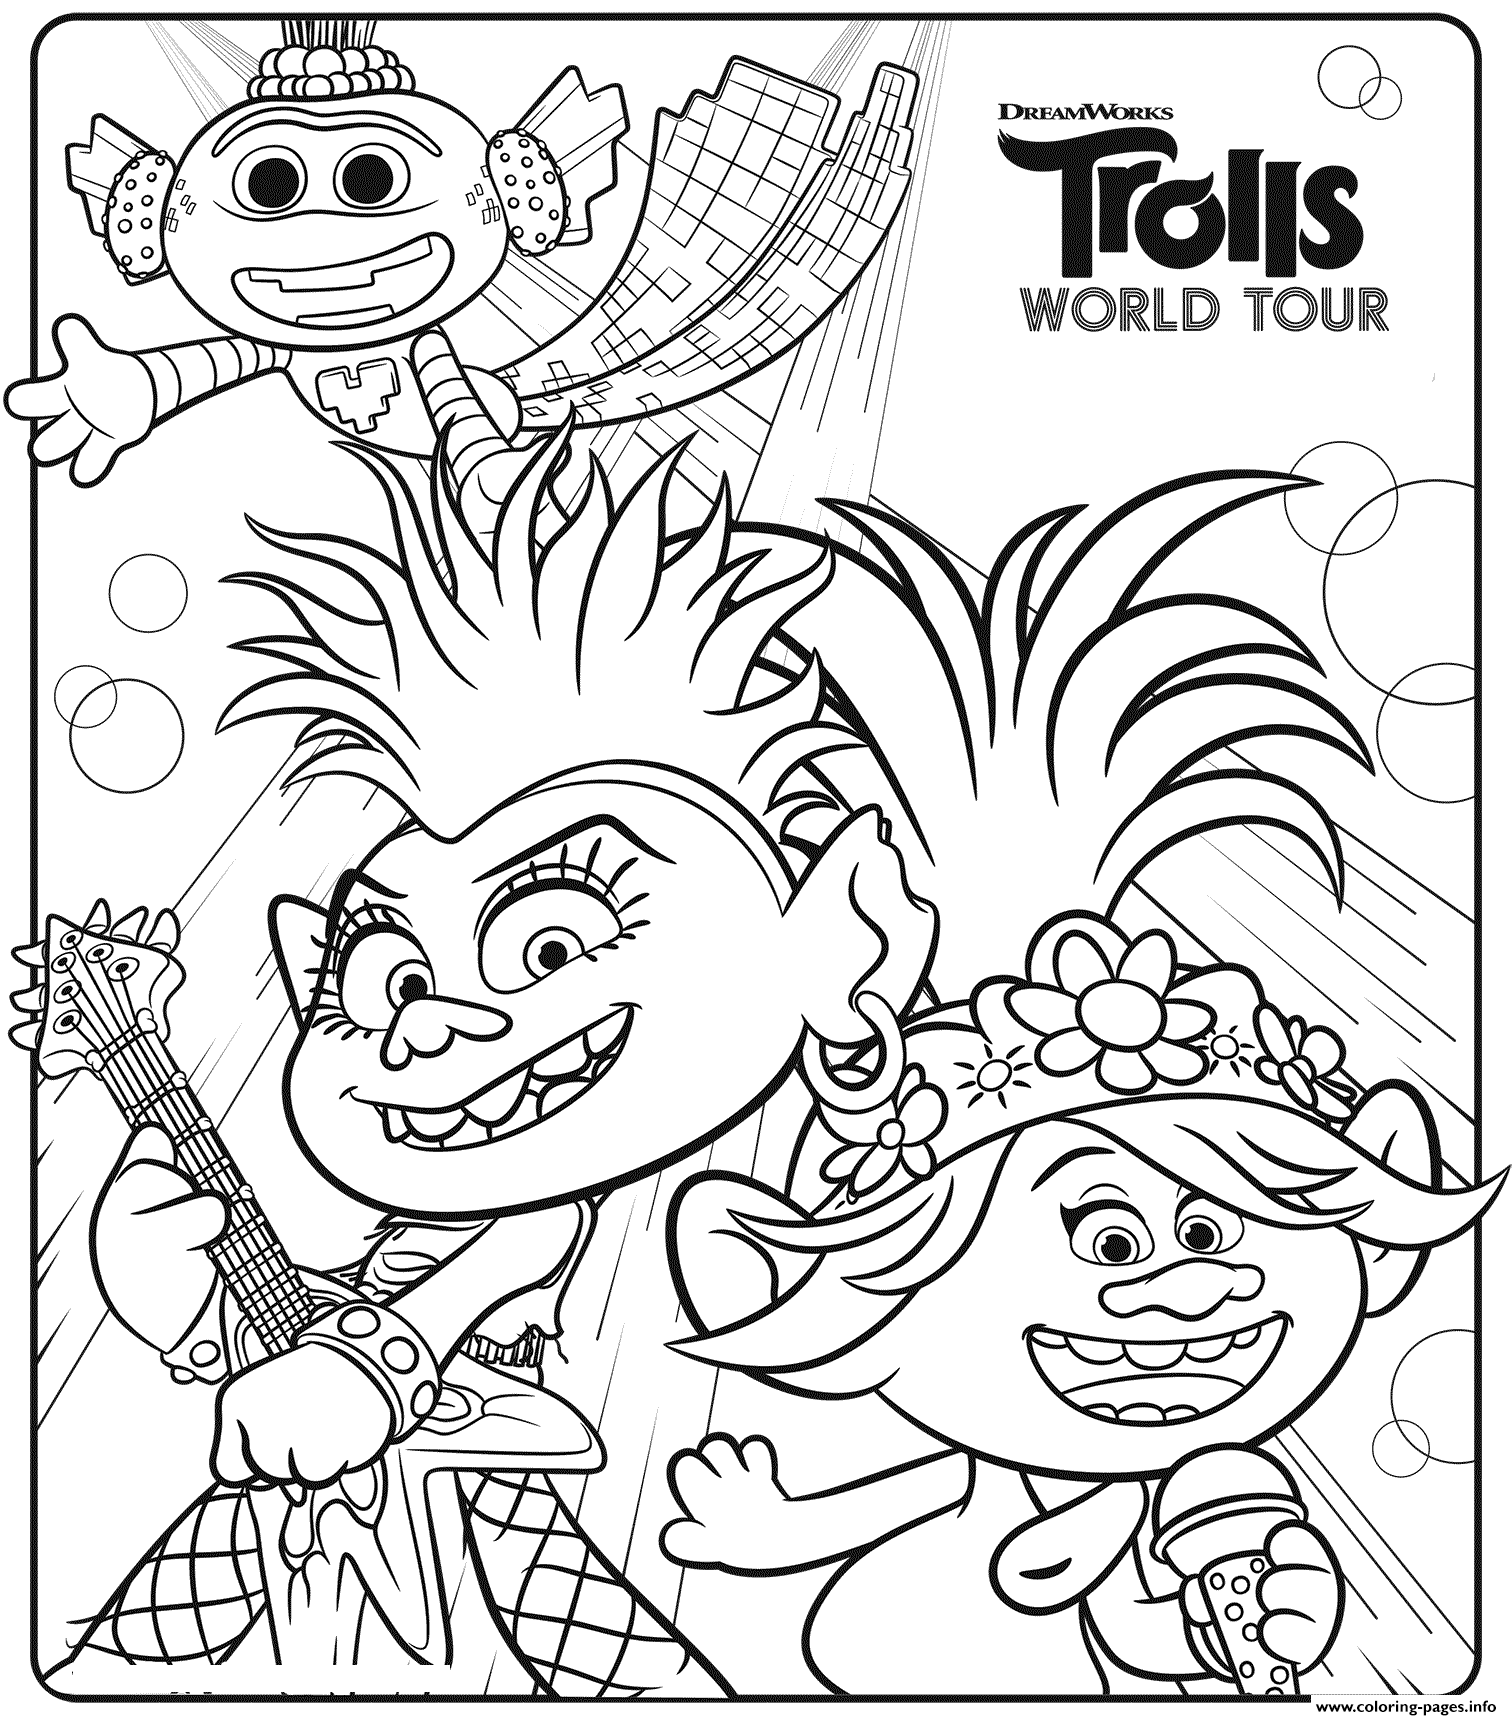 Trolls World Tour Coloring Pages Printable - Printable Word Searches